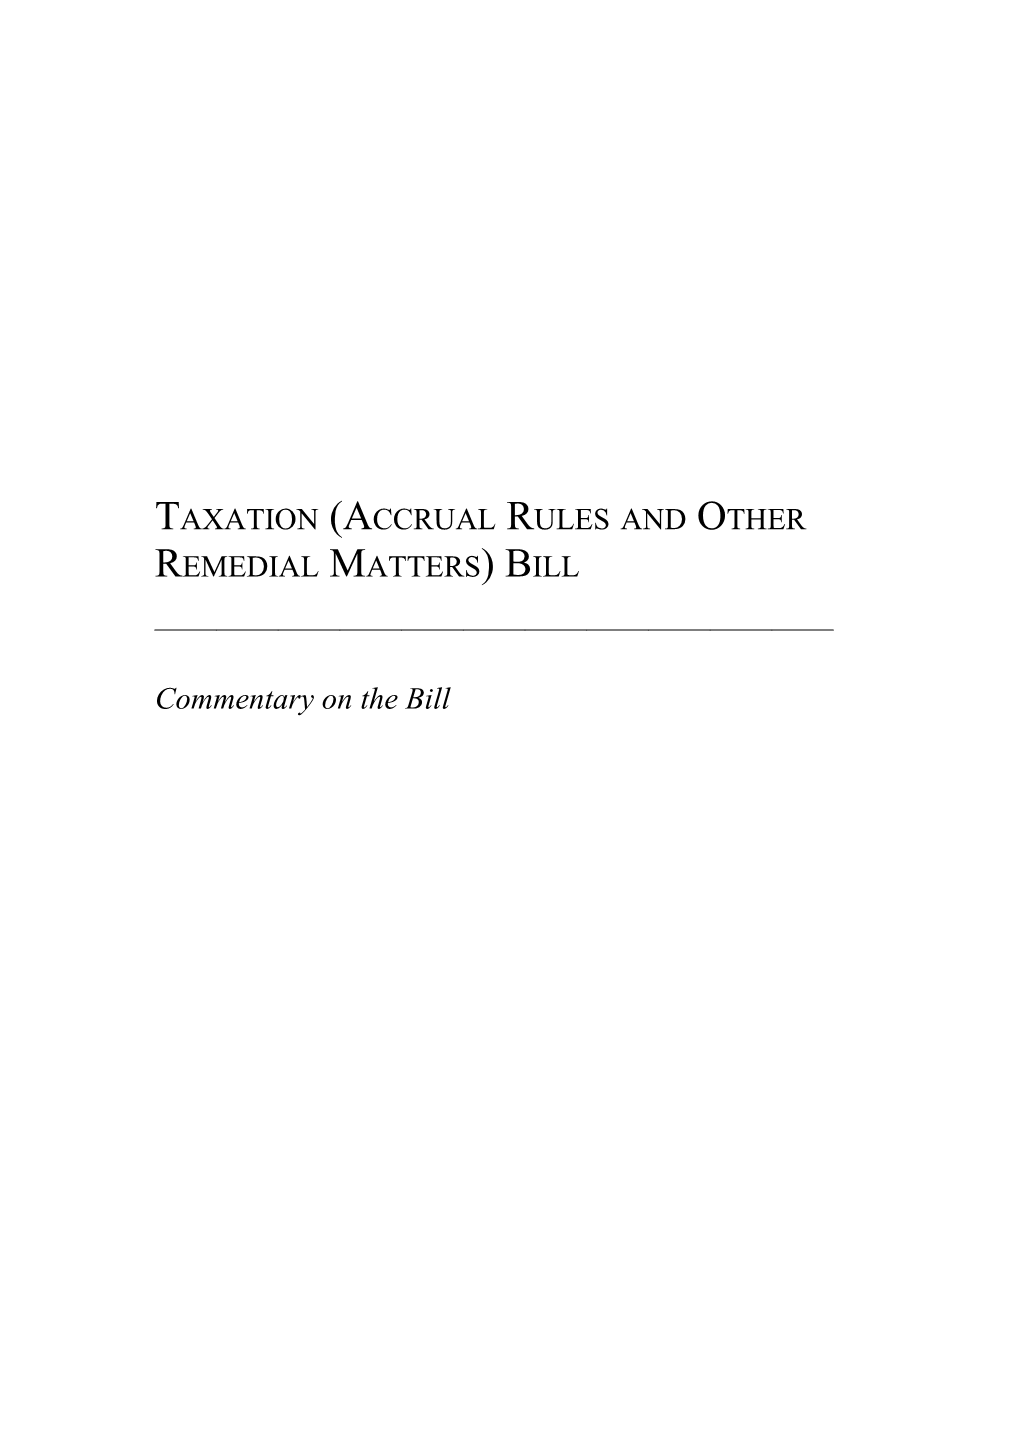 Taxation (Accrual Rules and Other Remedial Matters) Bill